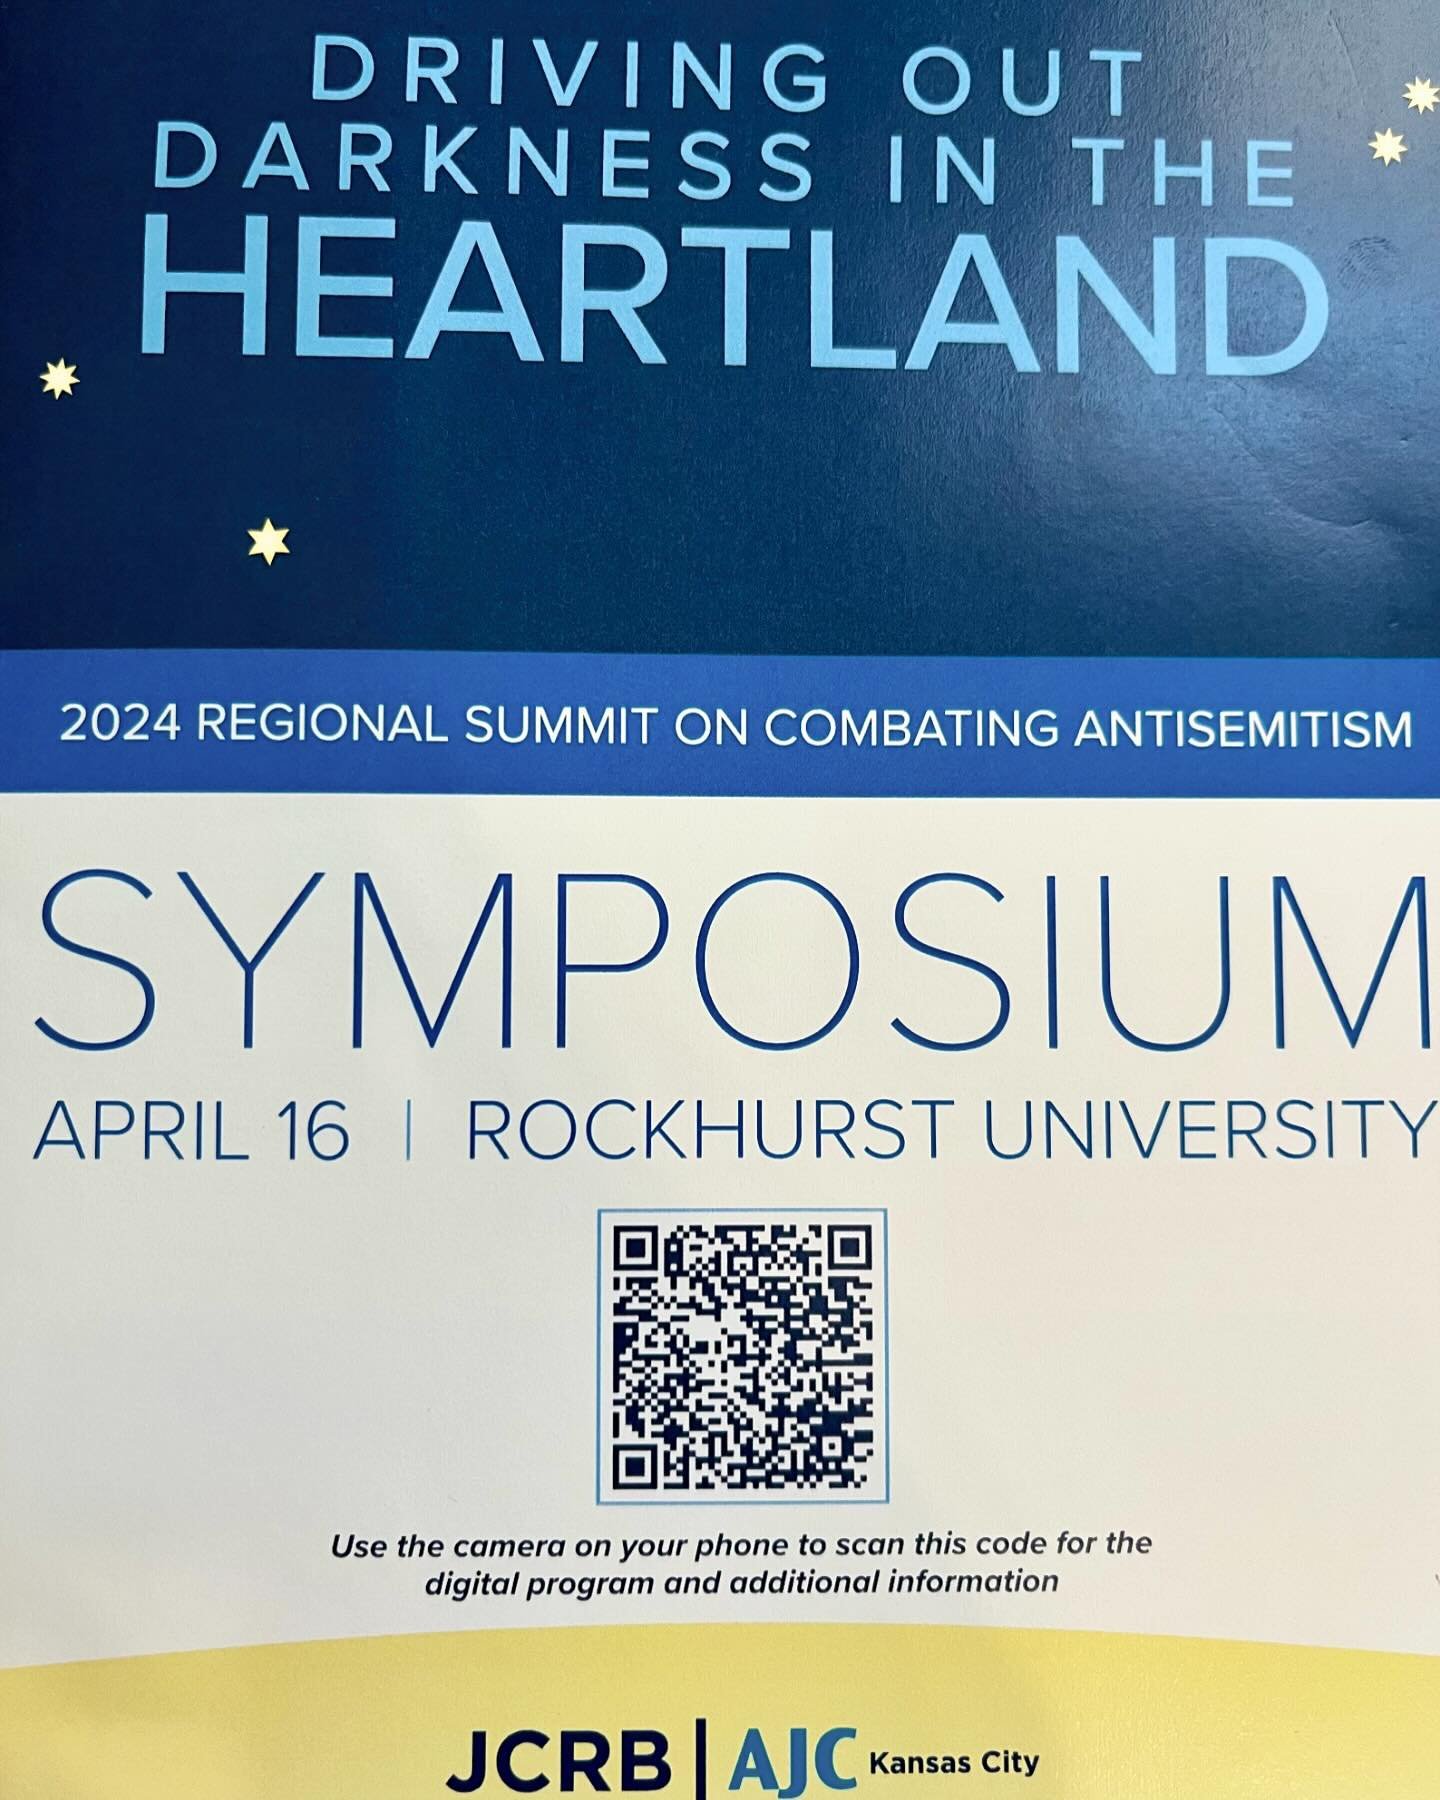 Yesterday, I attended a Regional Summit on Combating Antisemitism, hosted by @jewishjusticekc featuring speakers including the Second Gentleman of the US, KS Senator, Mayor of Charlottesville, VA, Founder of SevenDays, &amp; President of the American